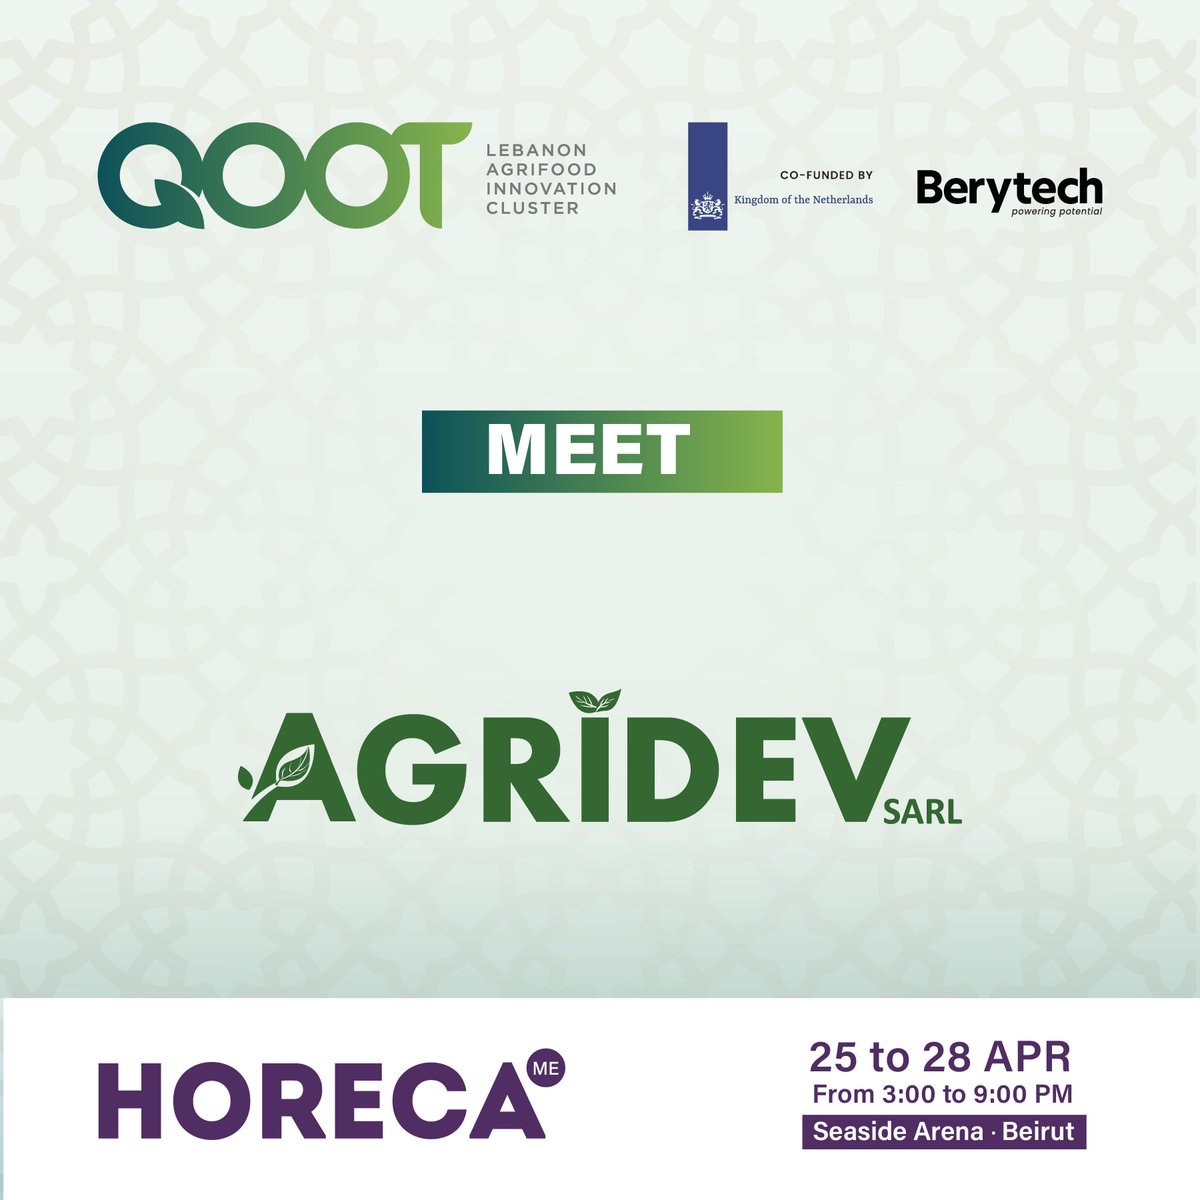 Pass by the QOOT Cluster’s booth at the HORECA exhibition to meet our member Agridev and discover their products. 
Book your calendars and join us April 25 – 28 from 3 to 9 pm at the Seaside Arena, Beirut.

qoot.org/qoot-cluster-s…

@HorecaConnects #HORECALebanon #QOOTinHORECA